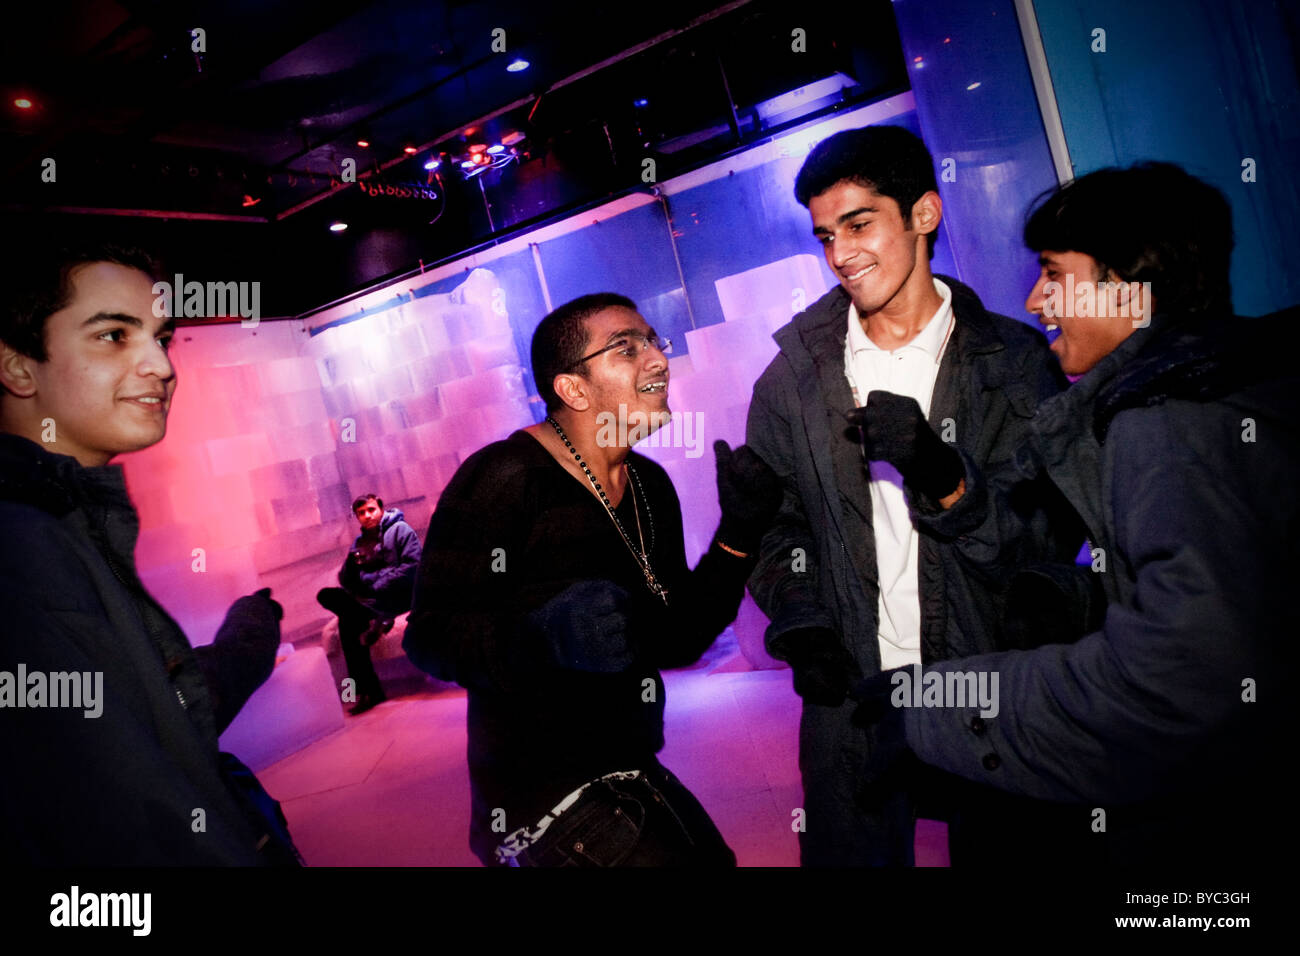 Guests dance at the nightclub 21 Fahrenheit, India's first ice bar, in Mumbai (Bombay) in India Stock Photo